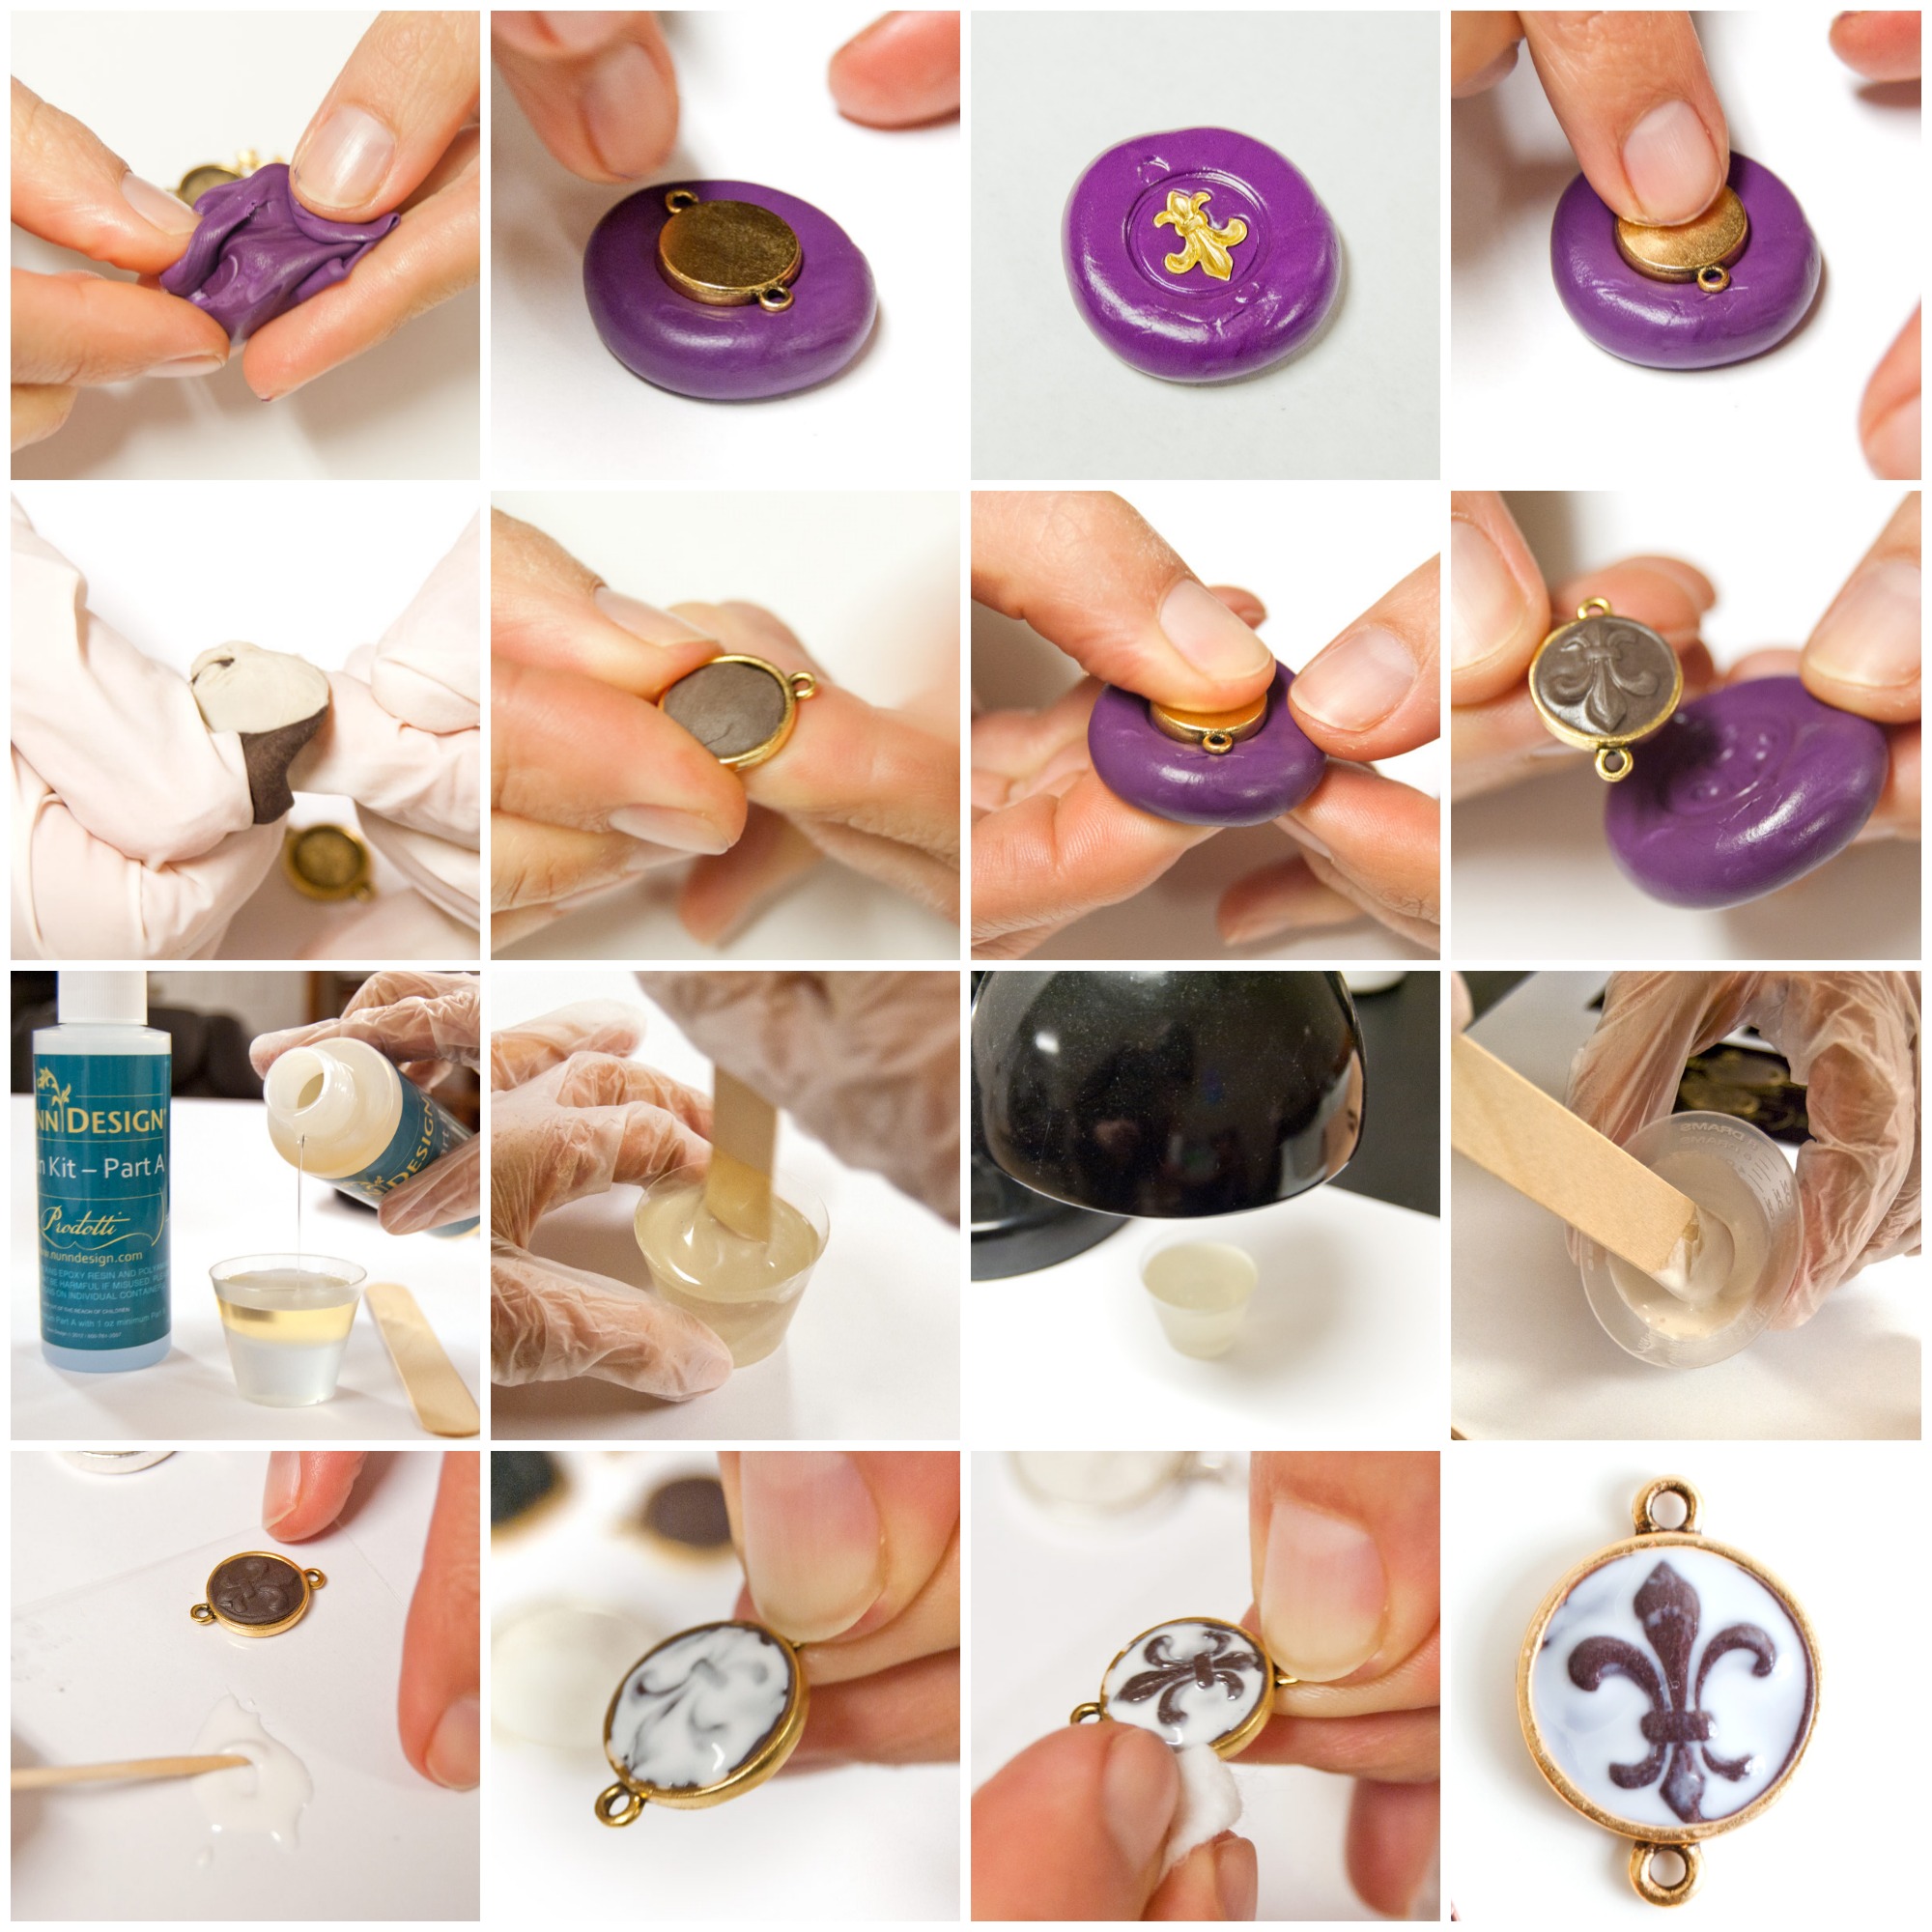 Make Your Own Resin Jewelry: Everything You Need to Create Beautiful Resin  Accessories - Kit Includes: Two-part Epoxy Resin, Resin Dye, Glitter,  Silicone Jewelry Mold, Mixing Cup, Stir Stick, Chain and Jump